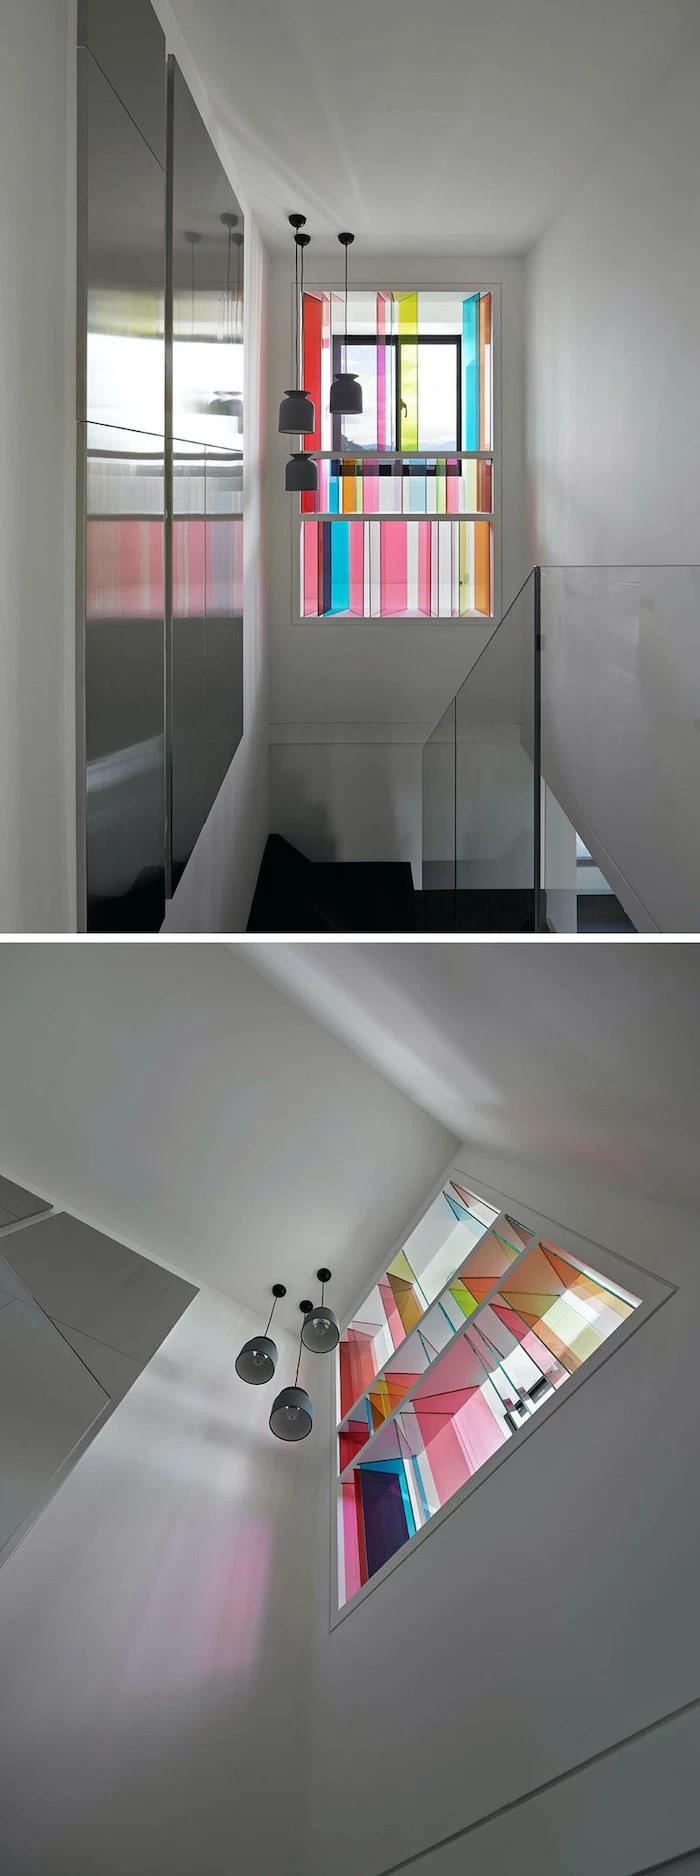 two photos of a hallway and staircase, window between the floors with colored windows, stained glass doors